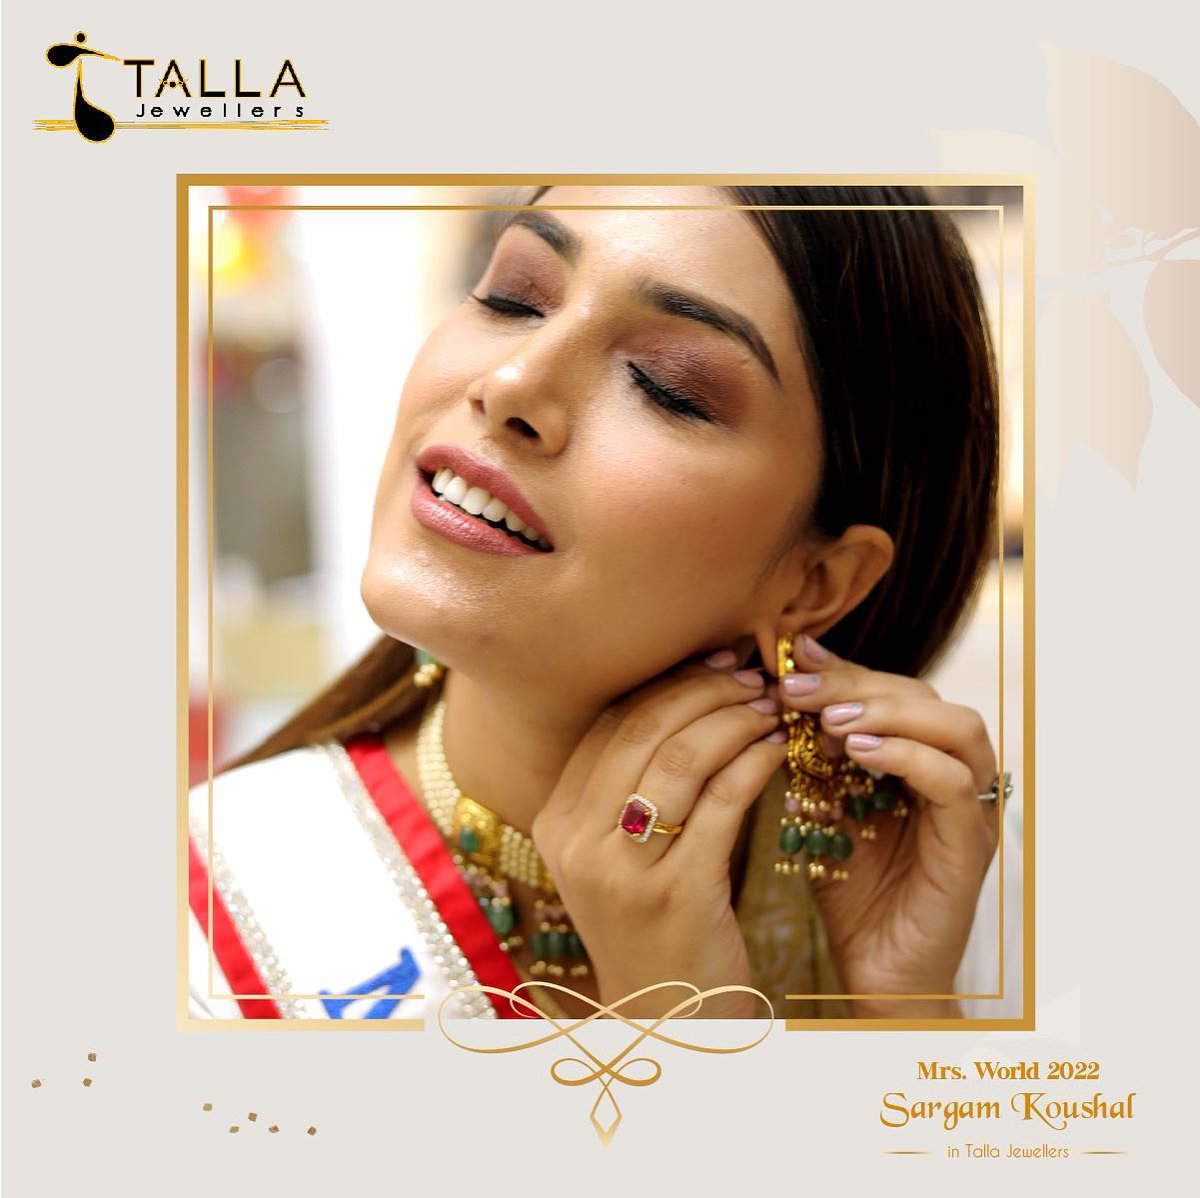 We invited Mrs. World 2022, Sargam Koushal, to our Janipur store and were completely in awe! She tried on a few of our exquisite jewellery pieces and looked stunning.

#TallaJewellers #GoldJewellery #JewellersInJammu #MrsWorld2022 #SargamKoushal #SargamKoushalXTallaJewellers